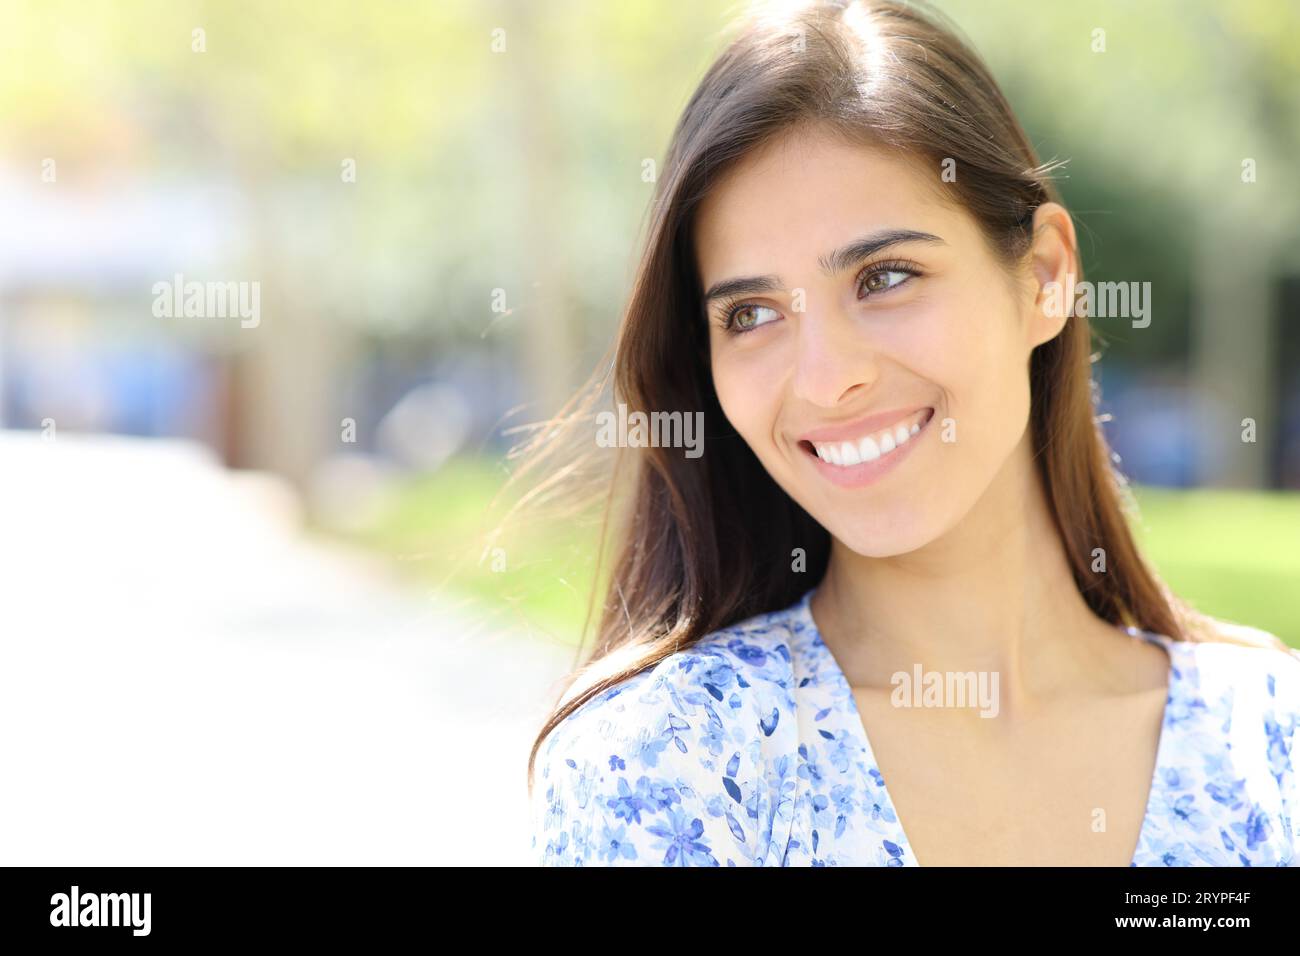 Portrait of a happy woman with perfect smile looking at side in the street Stock Photo